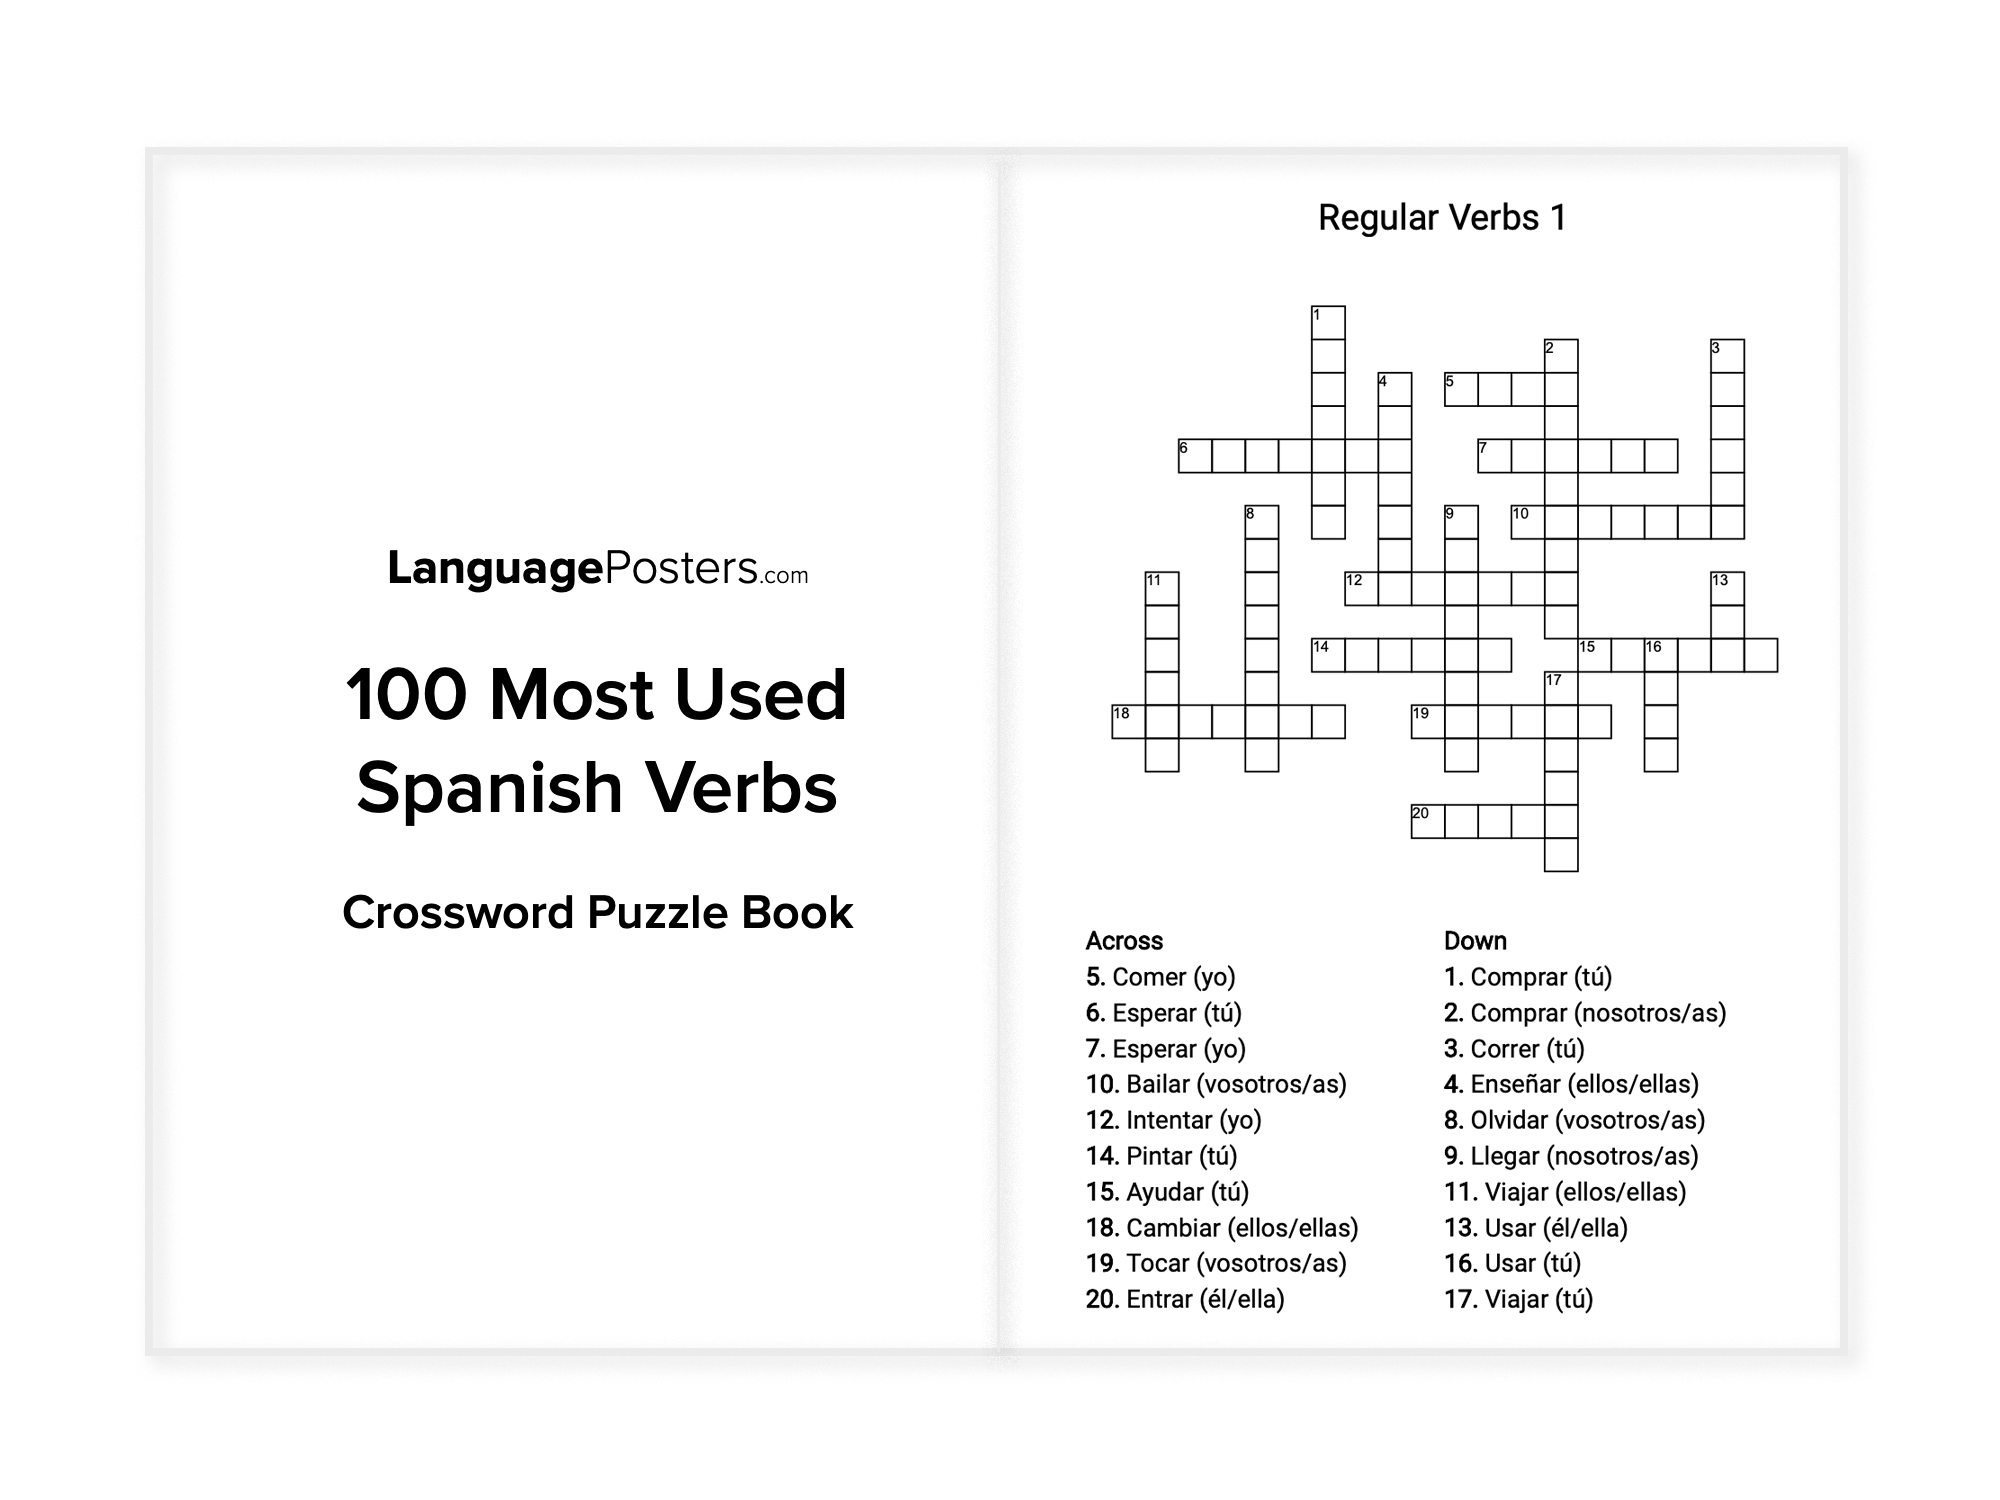 LanguagePosters.com - 100 Most Used Spanish Verbs Crossword Puzzle Book Preview